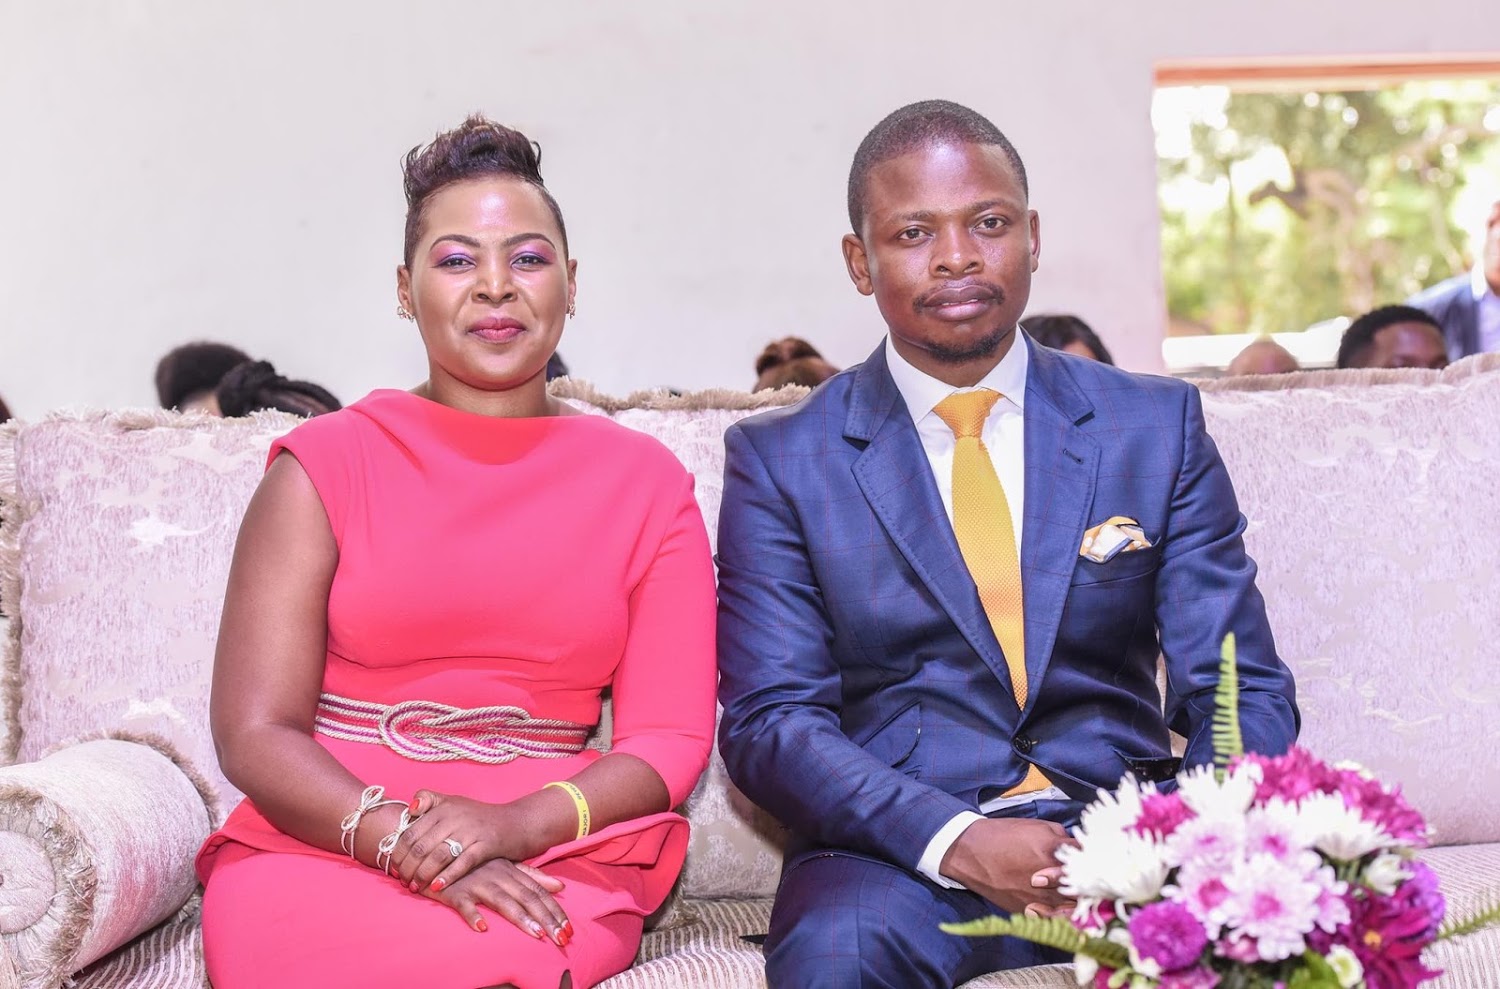 Prophet Bushiri And His Wife Mary To Be Banished From SA